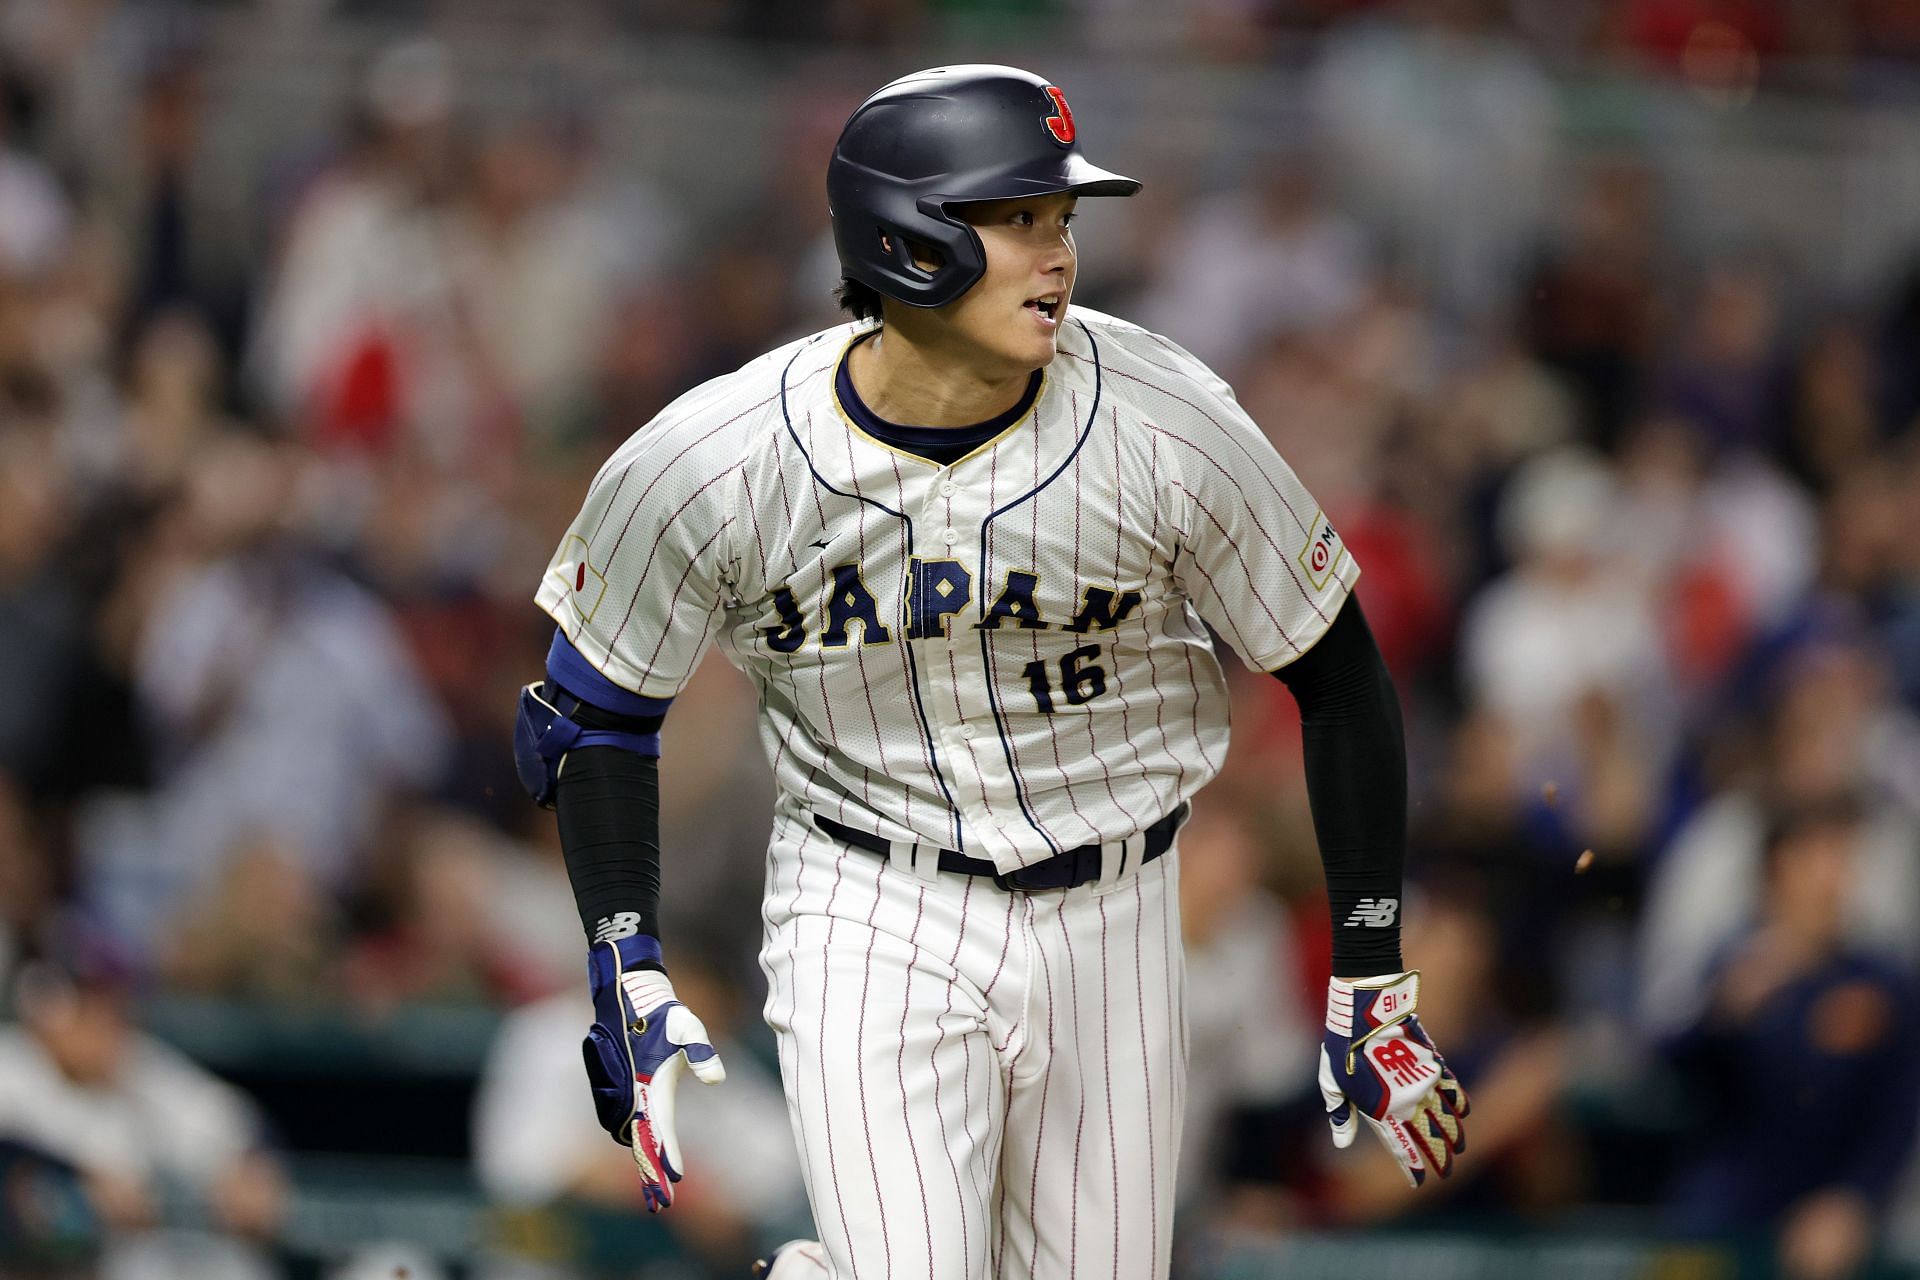 World Baseball Classic Semifinals: Shohei Ohtani #16 hits a double in the ninth inning against Team Mexico during the World Baseball Classic Semifinals